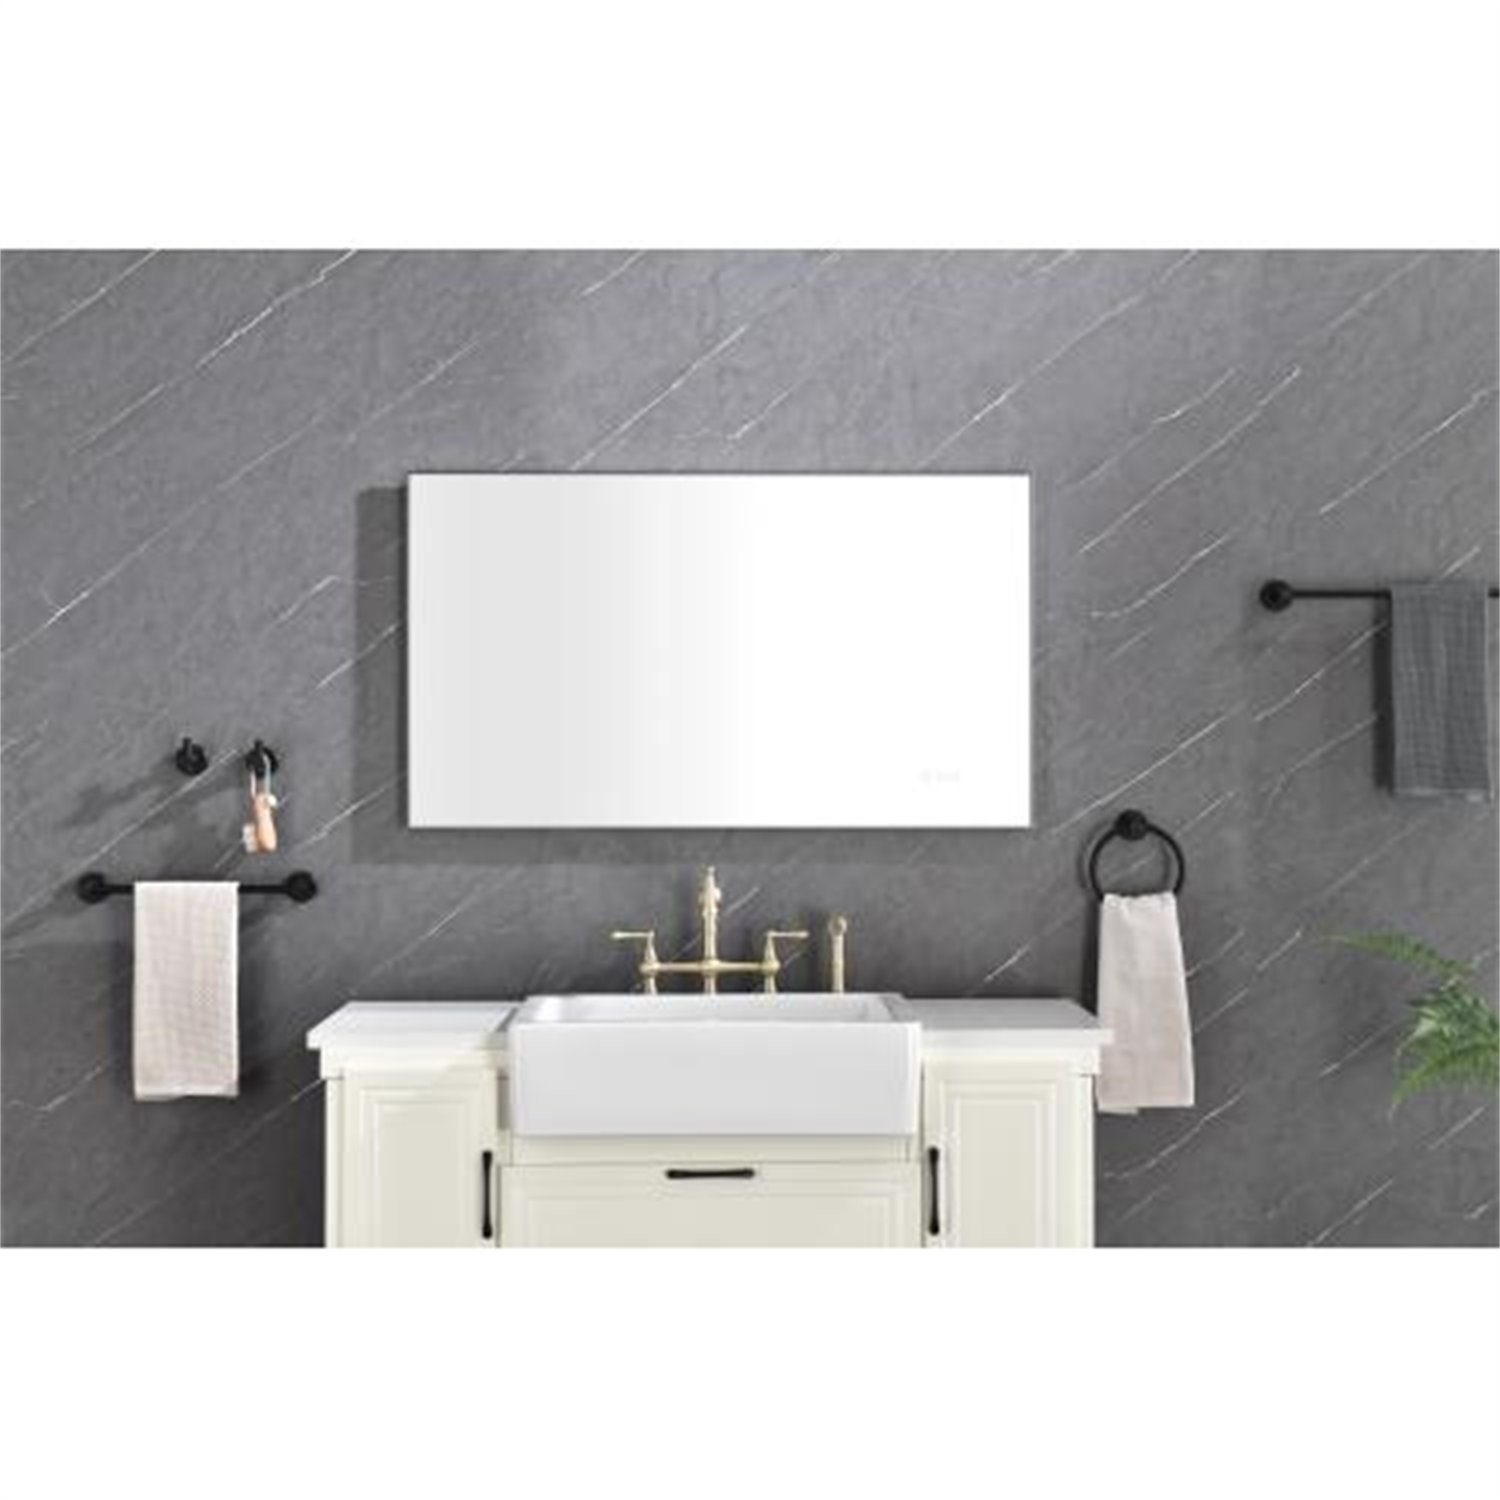 42x 24 Inch LED Mirror Bathroom Vanity Mirrors with Lights, Wall Mounted Anti-Fog Memory Large Dimmable Front Light Makeup Mirror